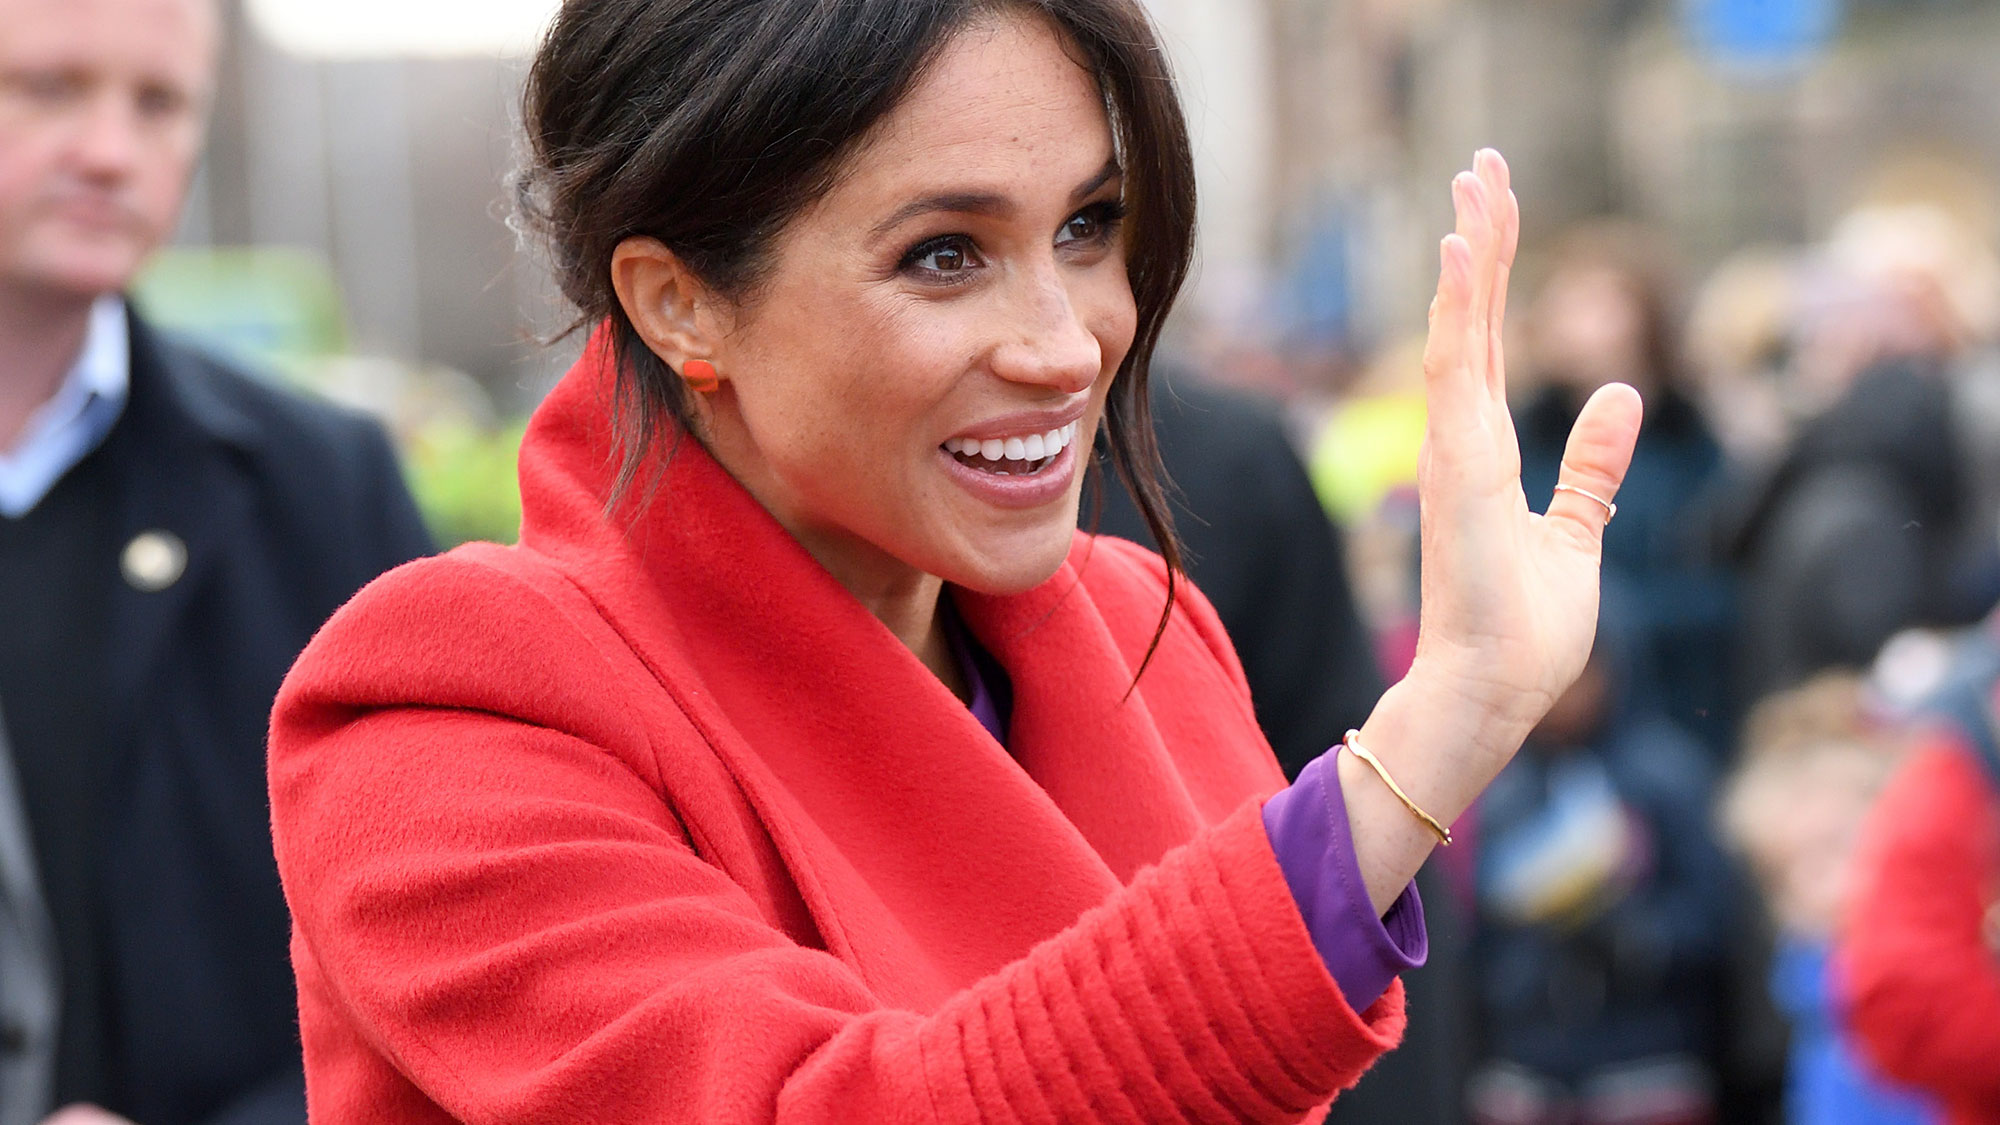 Meghan Markle’s gold bracelet is still available to buy